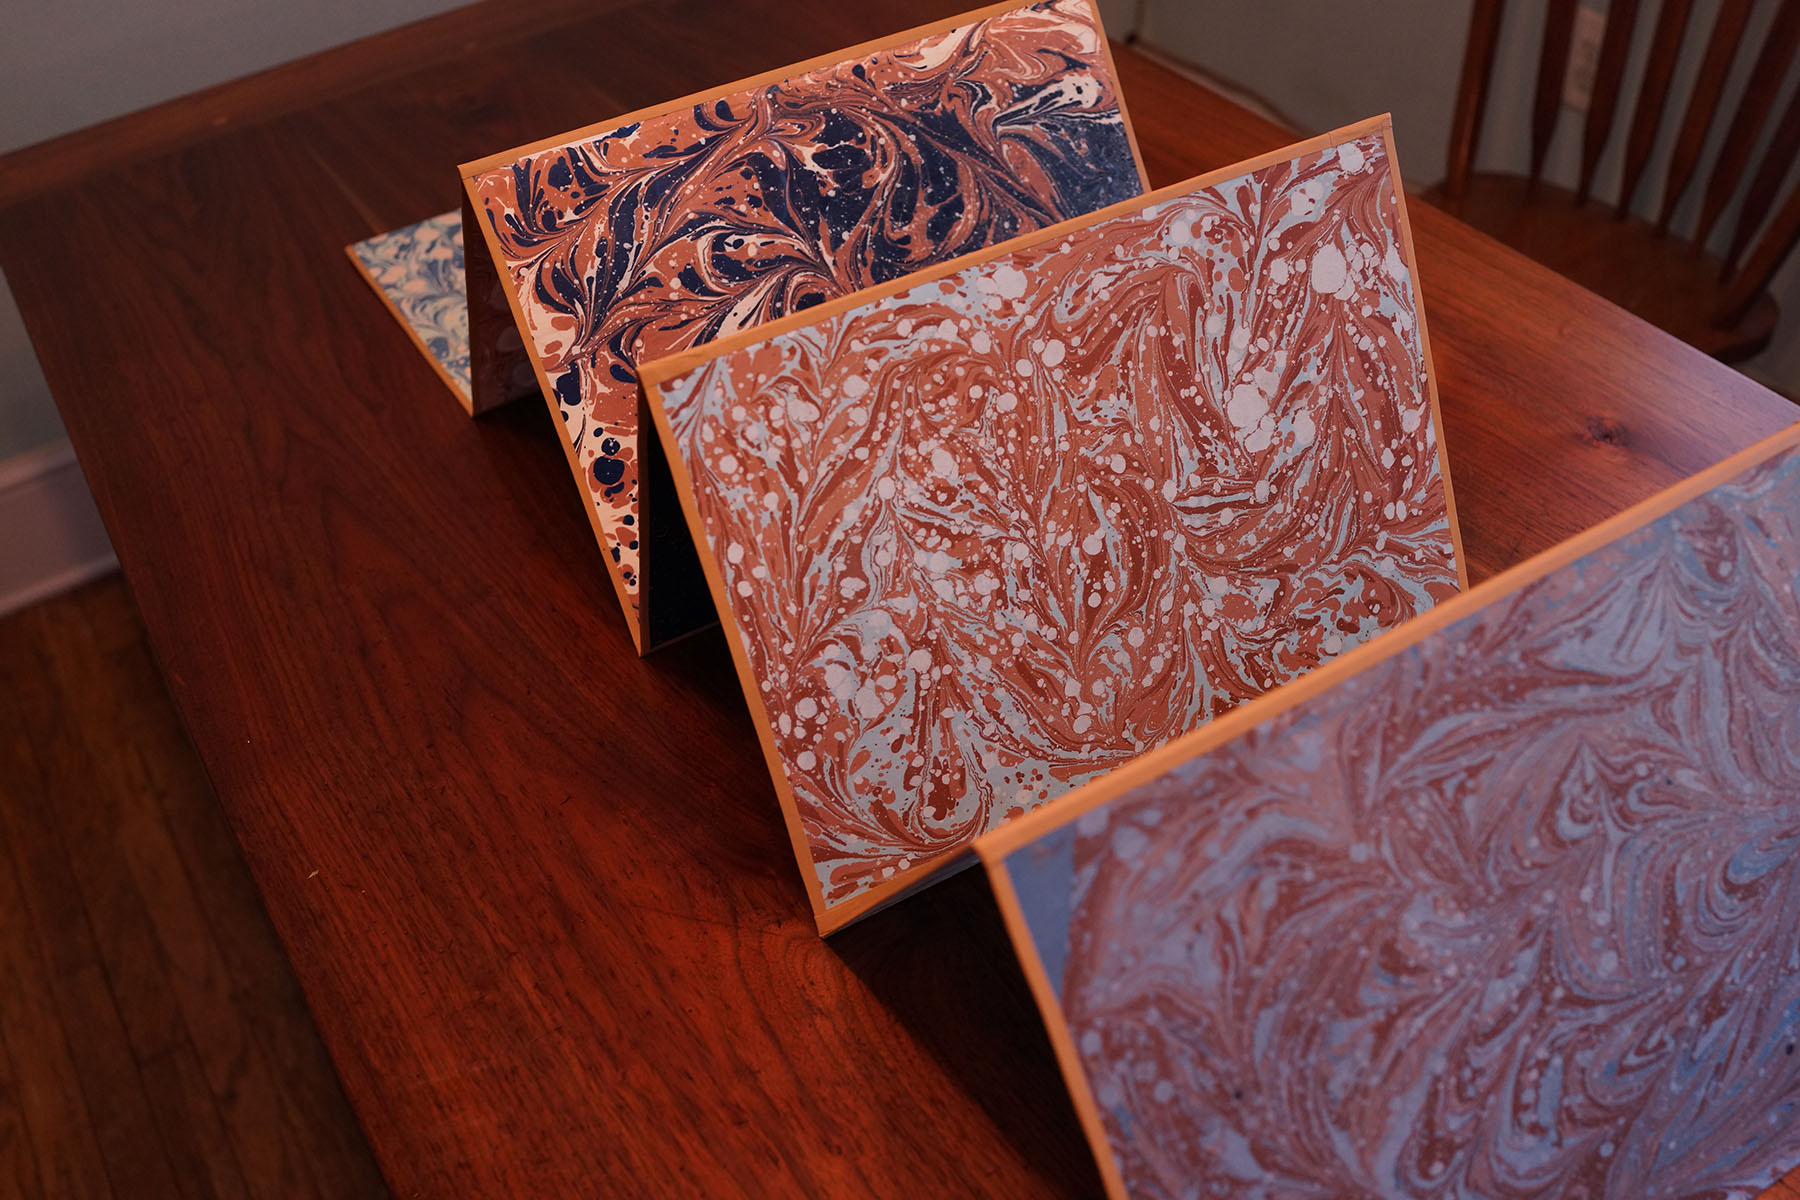 Ebru: Paper Marbling in the Turkish Tradition